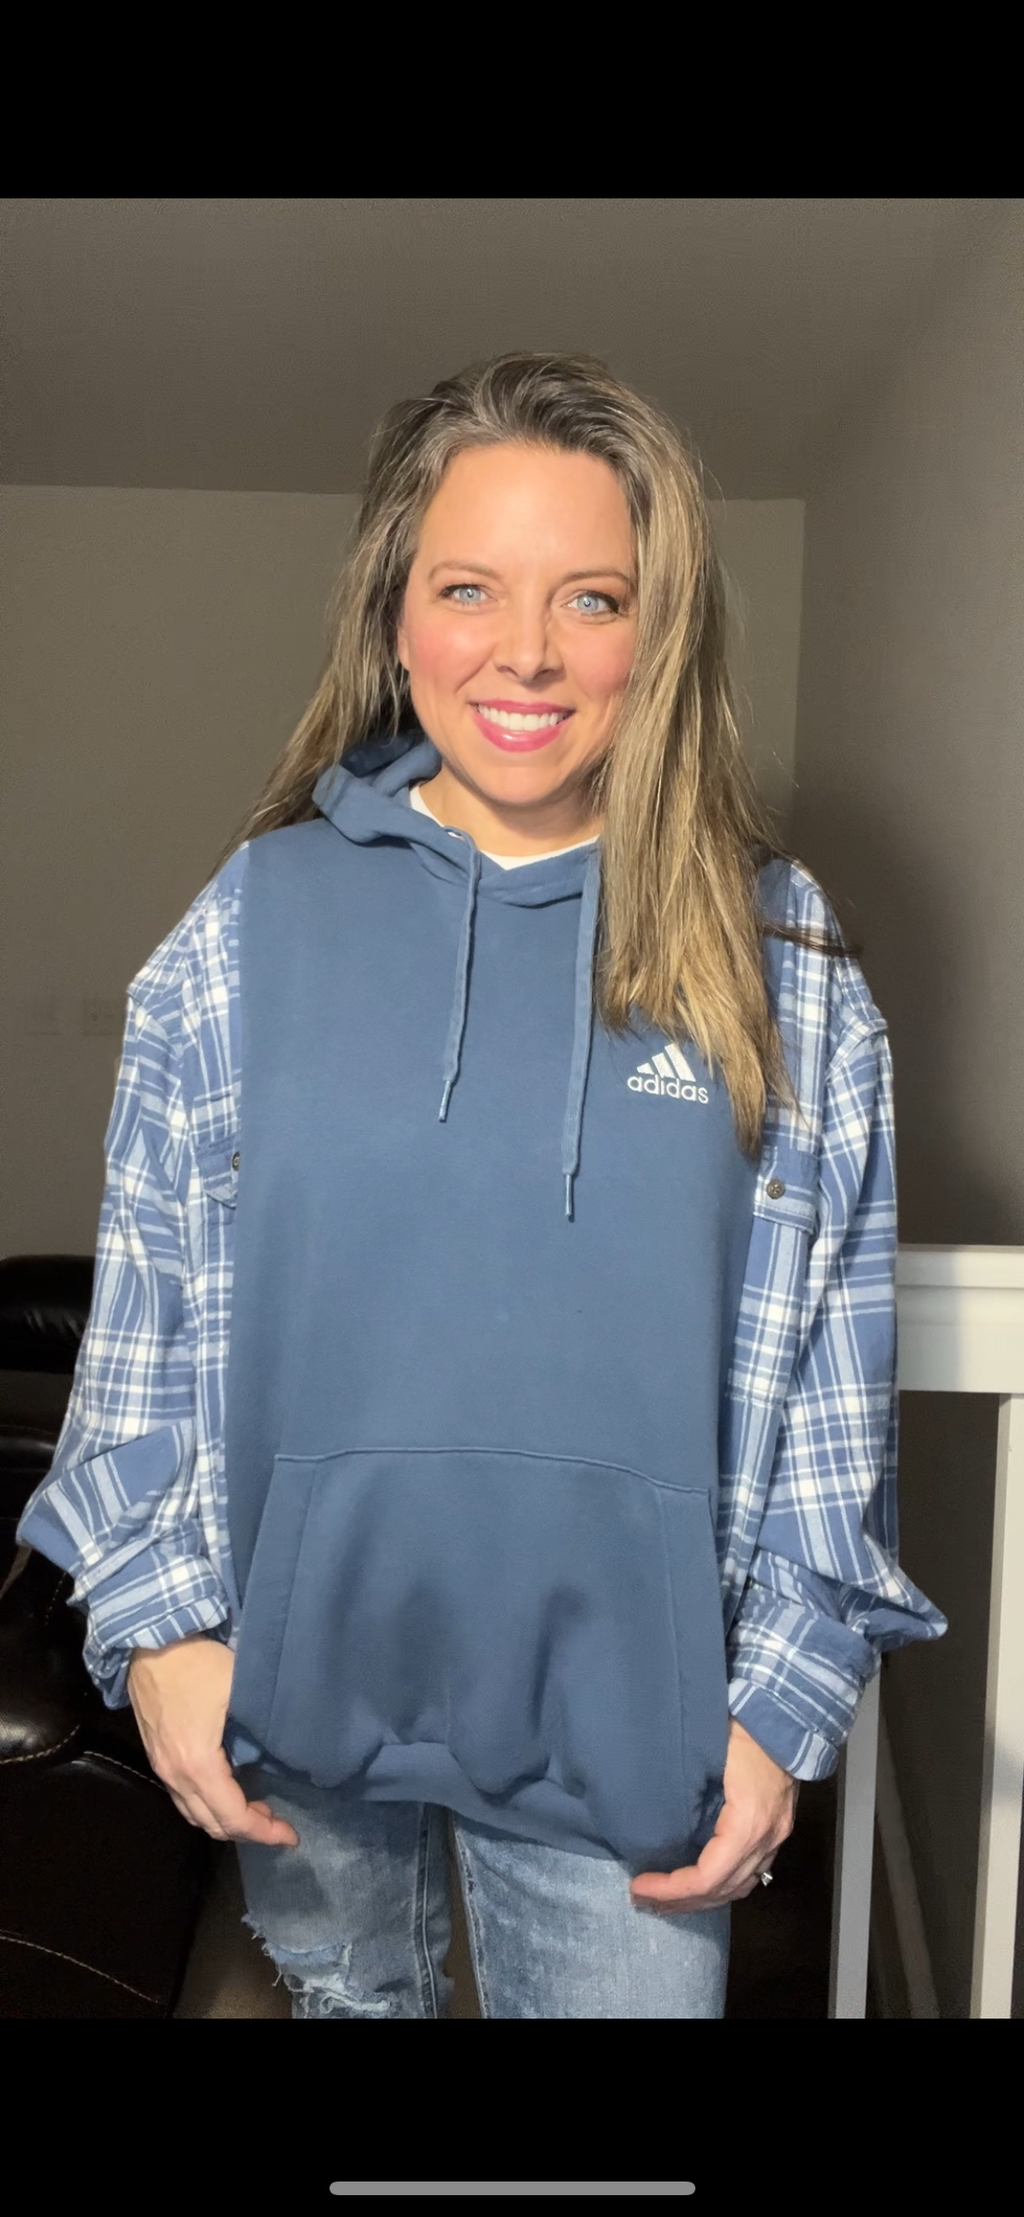 Upcycled Adidas blue – women’s 1X – soft thick sweatshirt with flannel sleeves￼